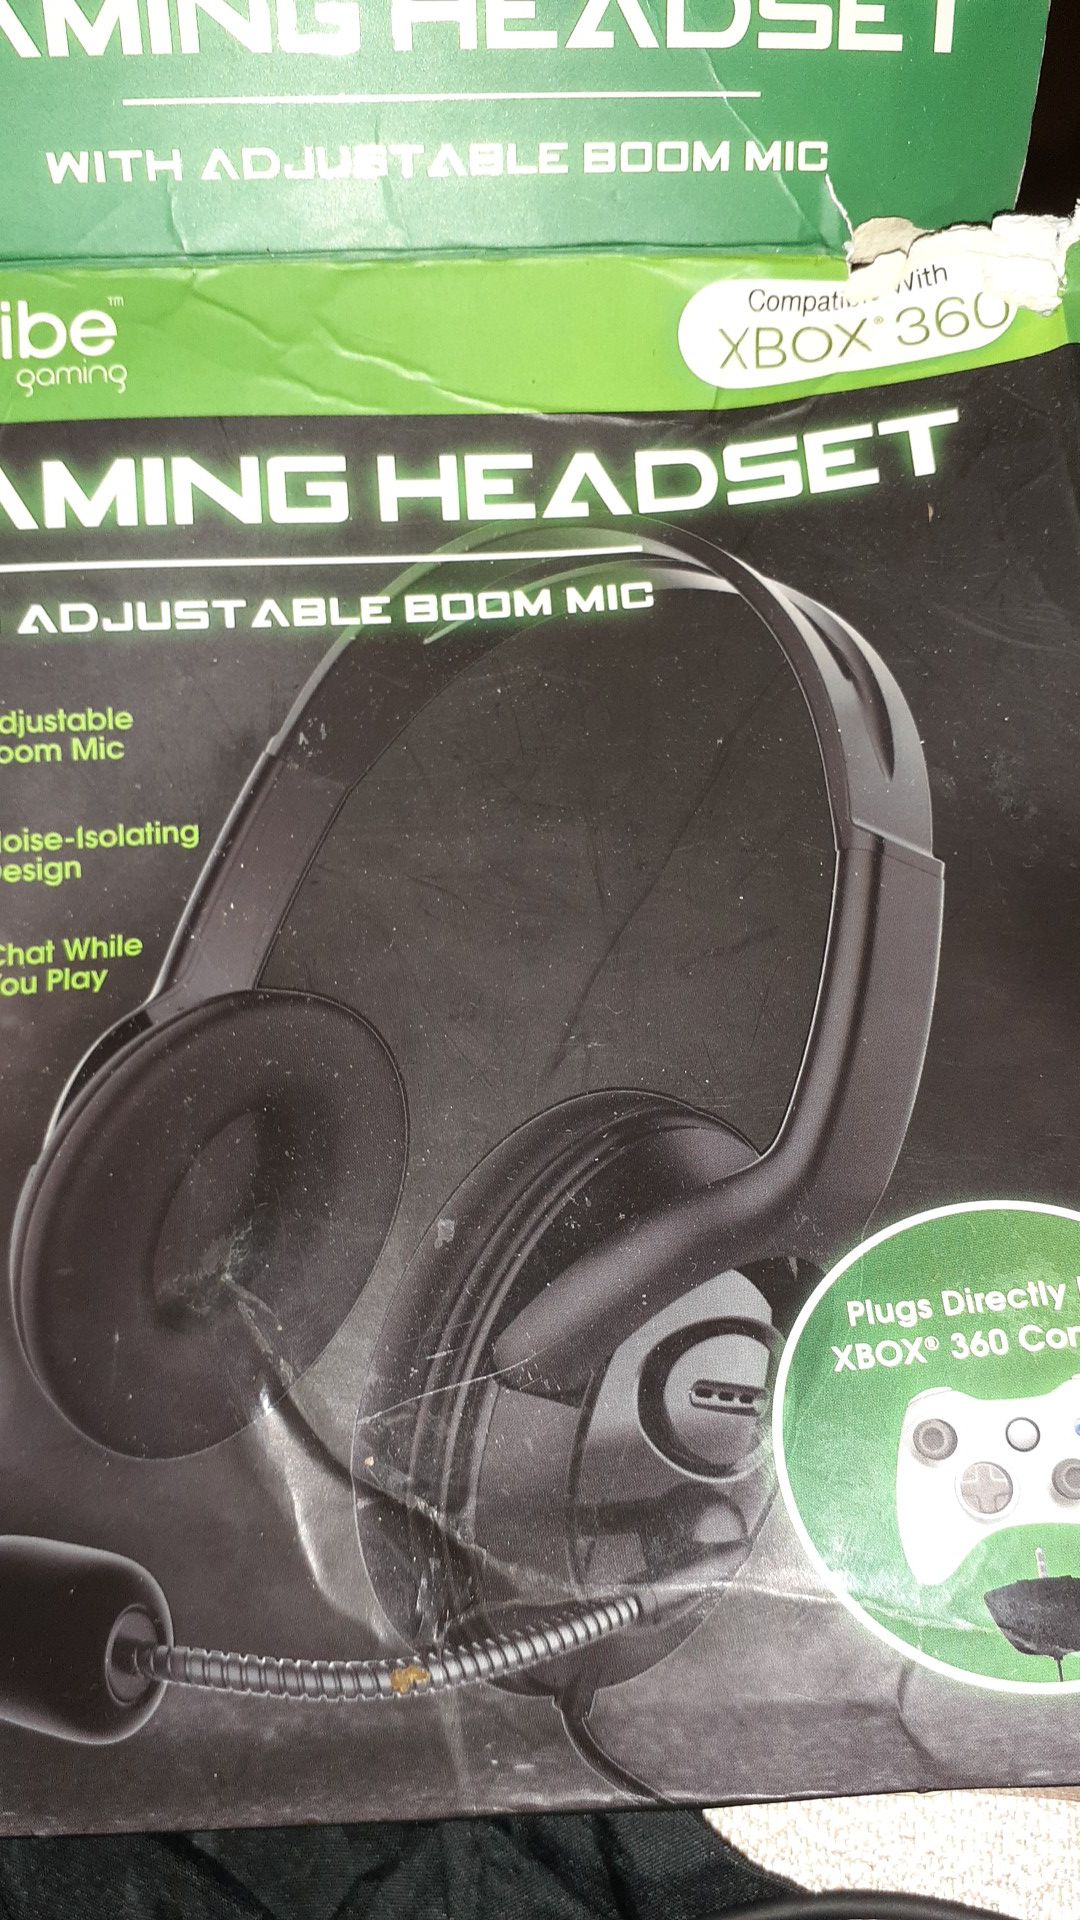 Xbox 360 headset and mic